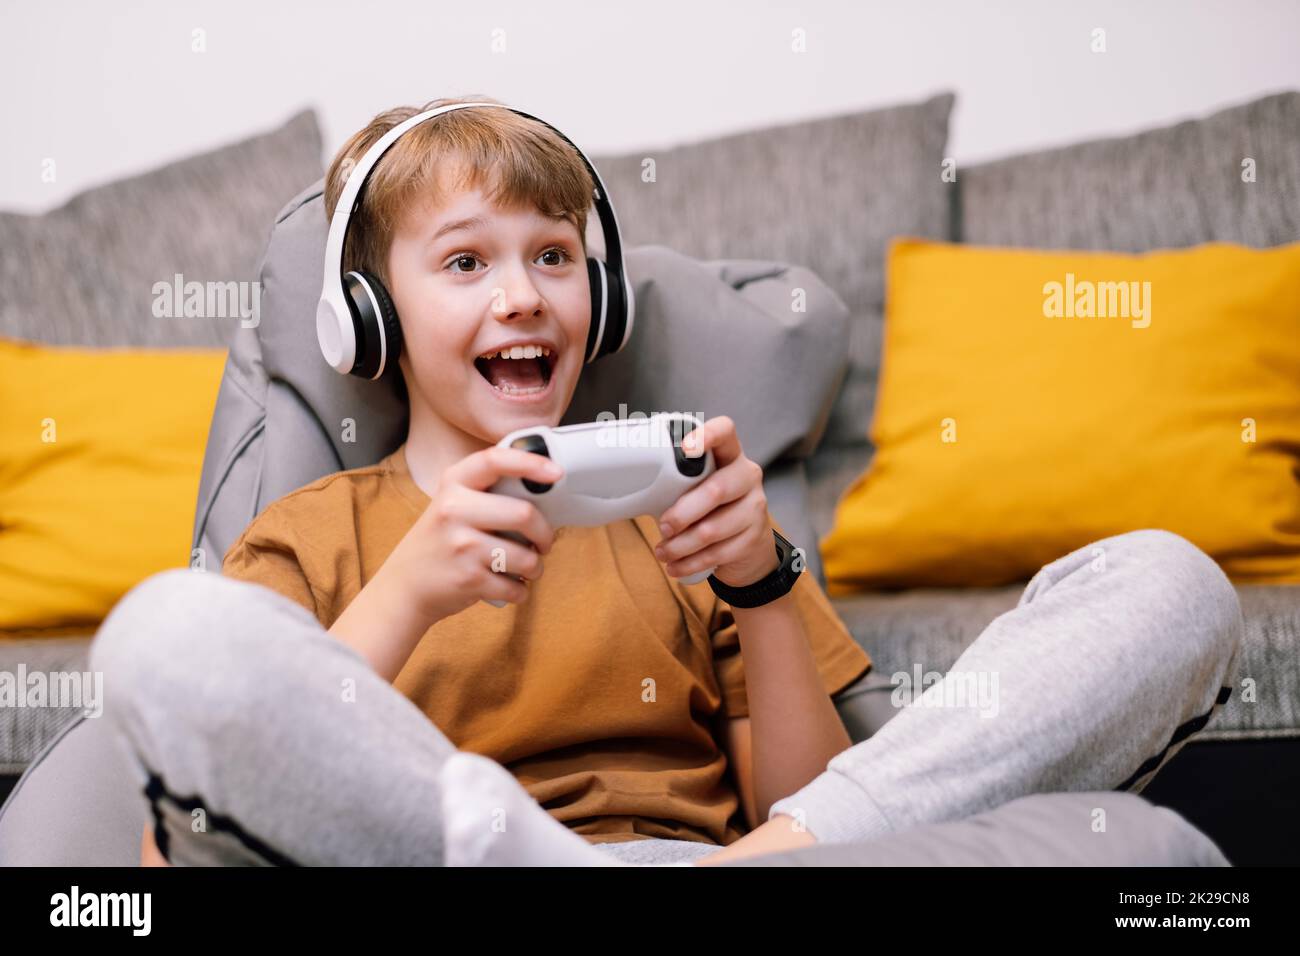 Having Fun at Home. Cheerful Black Teen Guy with Joystick Playing Online  Computer Games, Sitting on Couch Indoors Stock Image - Image of computer,  person: 227478857